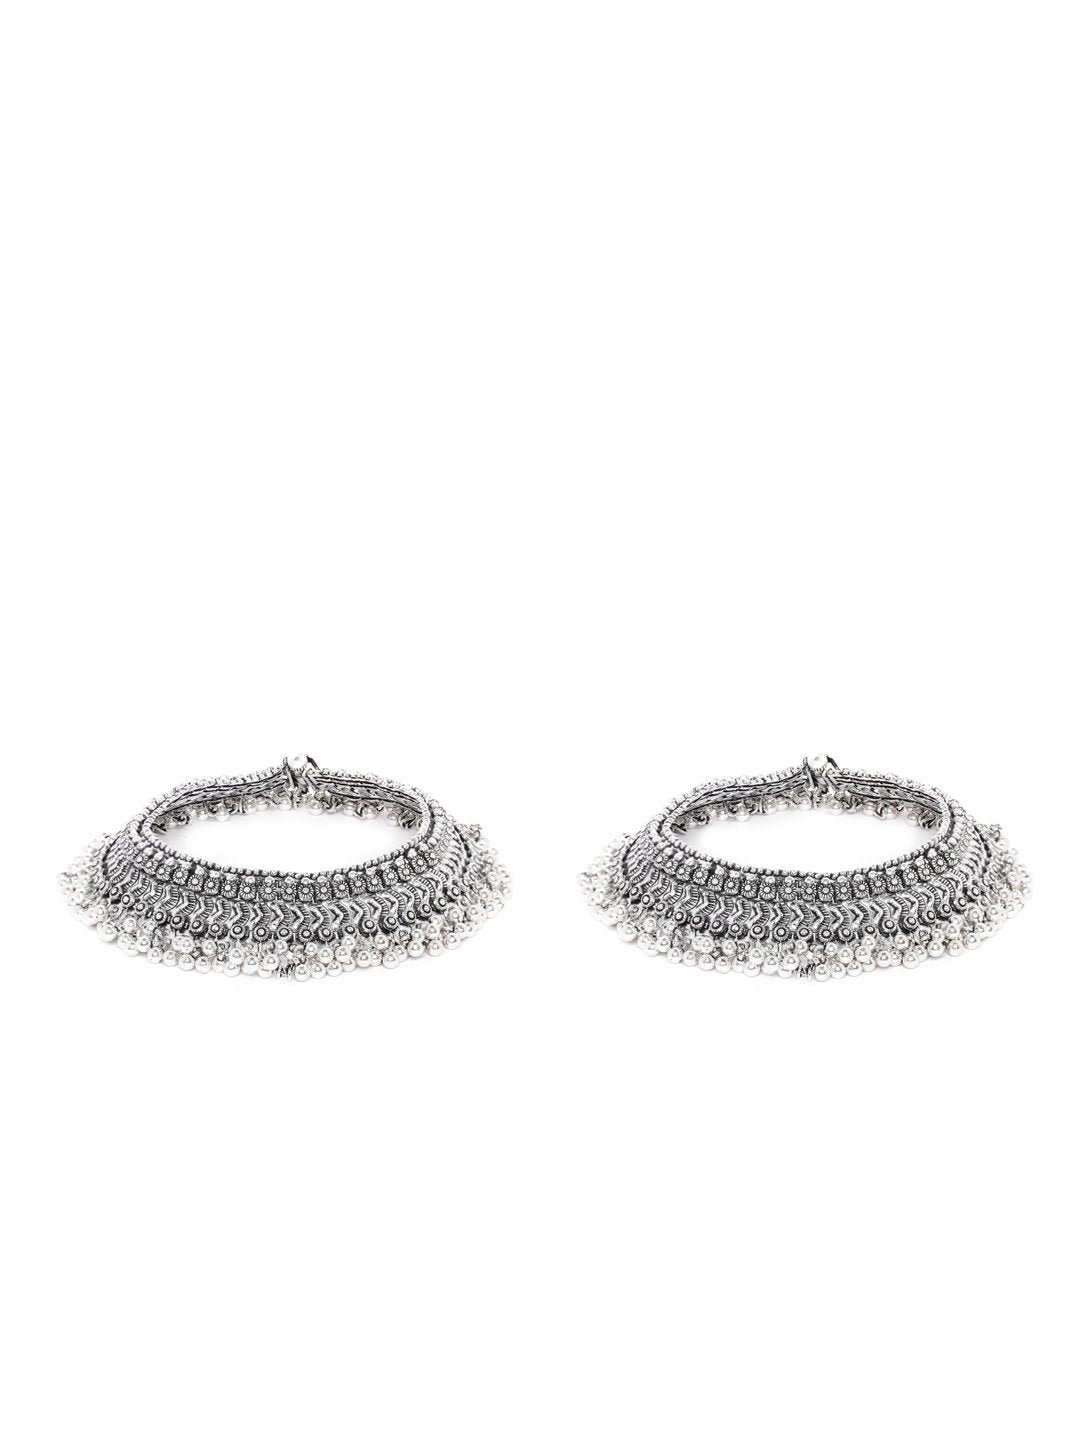 Women's  Antique Chunks - Oxidised Silver Plated Broad Anklets-Set of 2 - Priyaasi